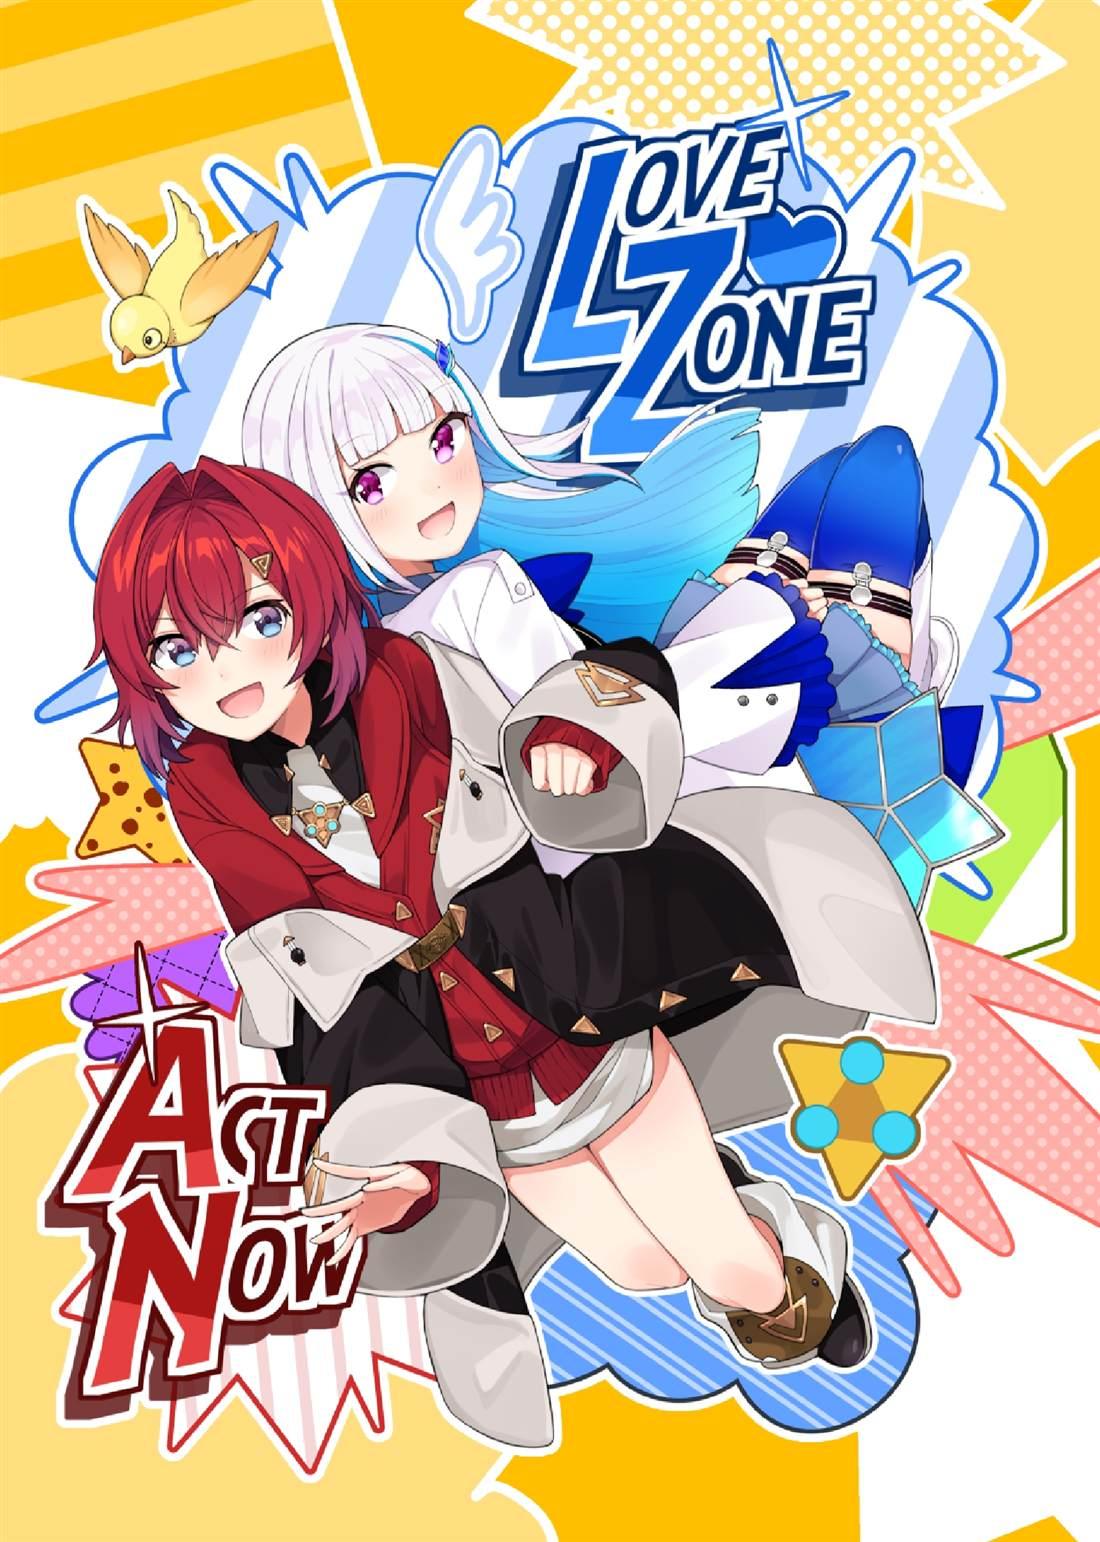 LOVE ZONE ACT NOW - 第1話 - 1